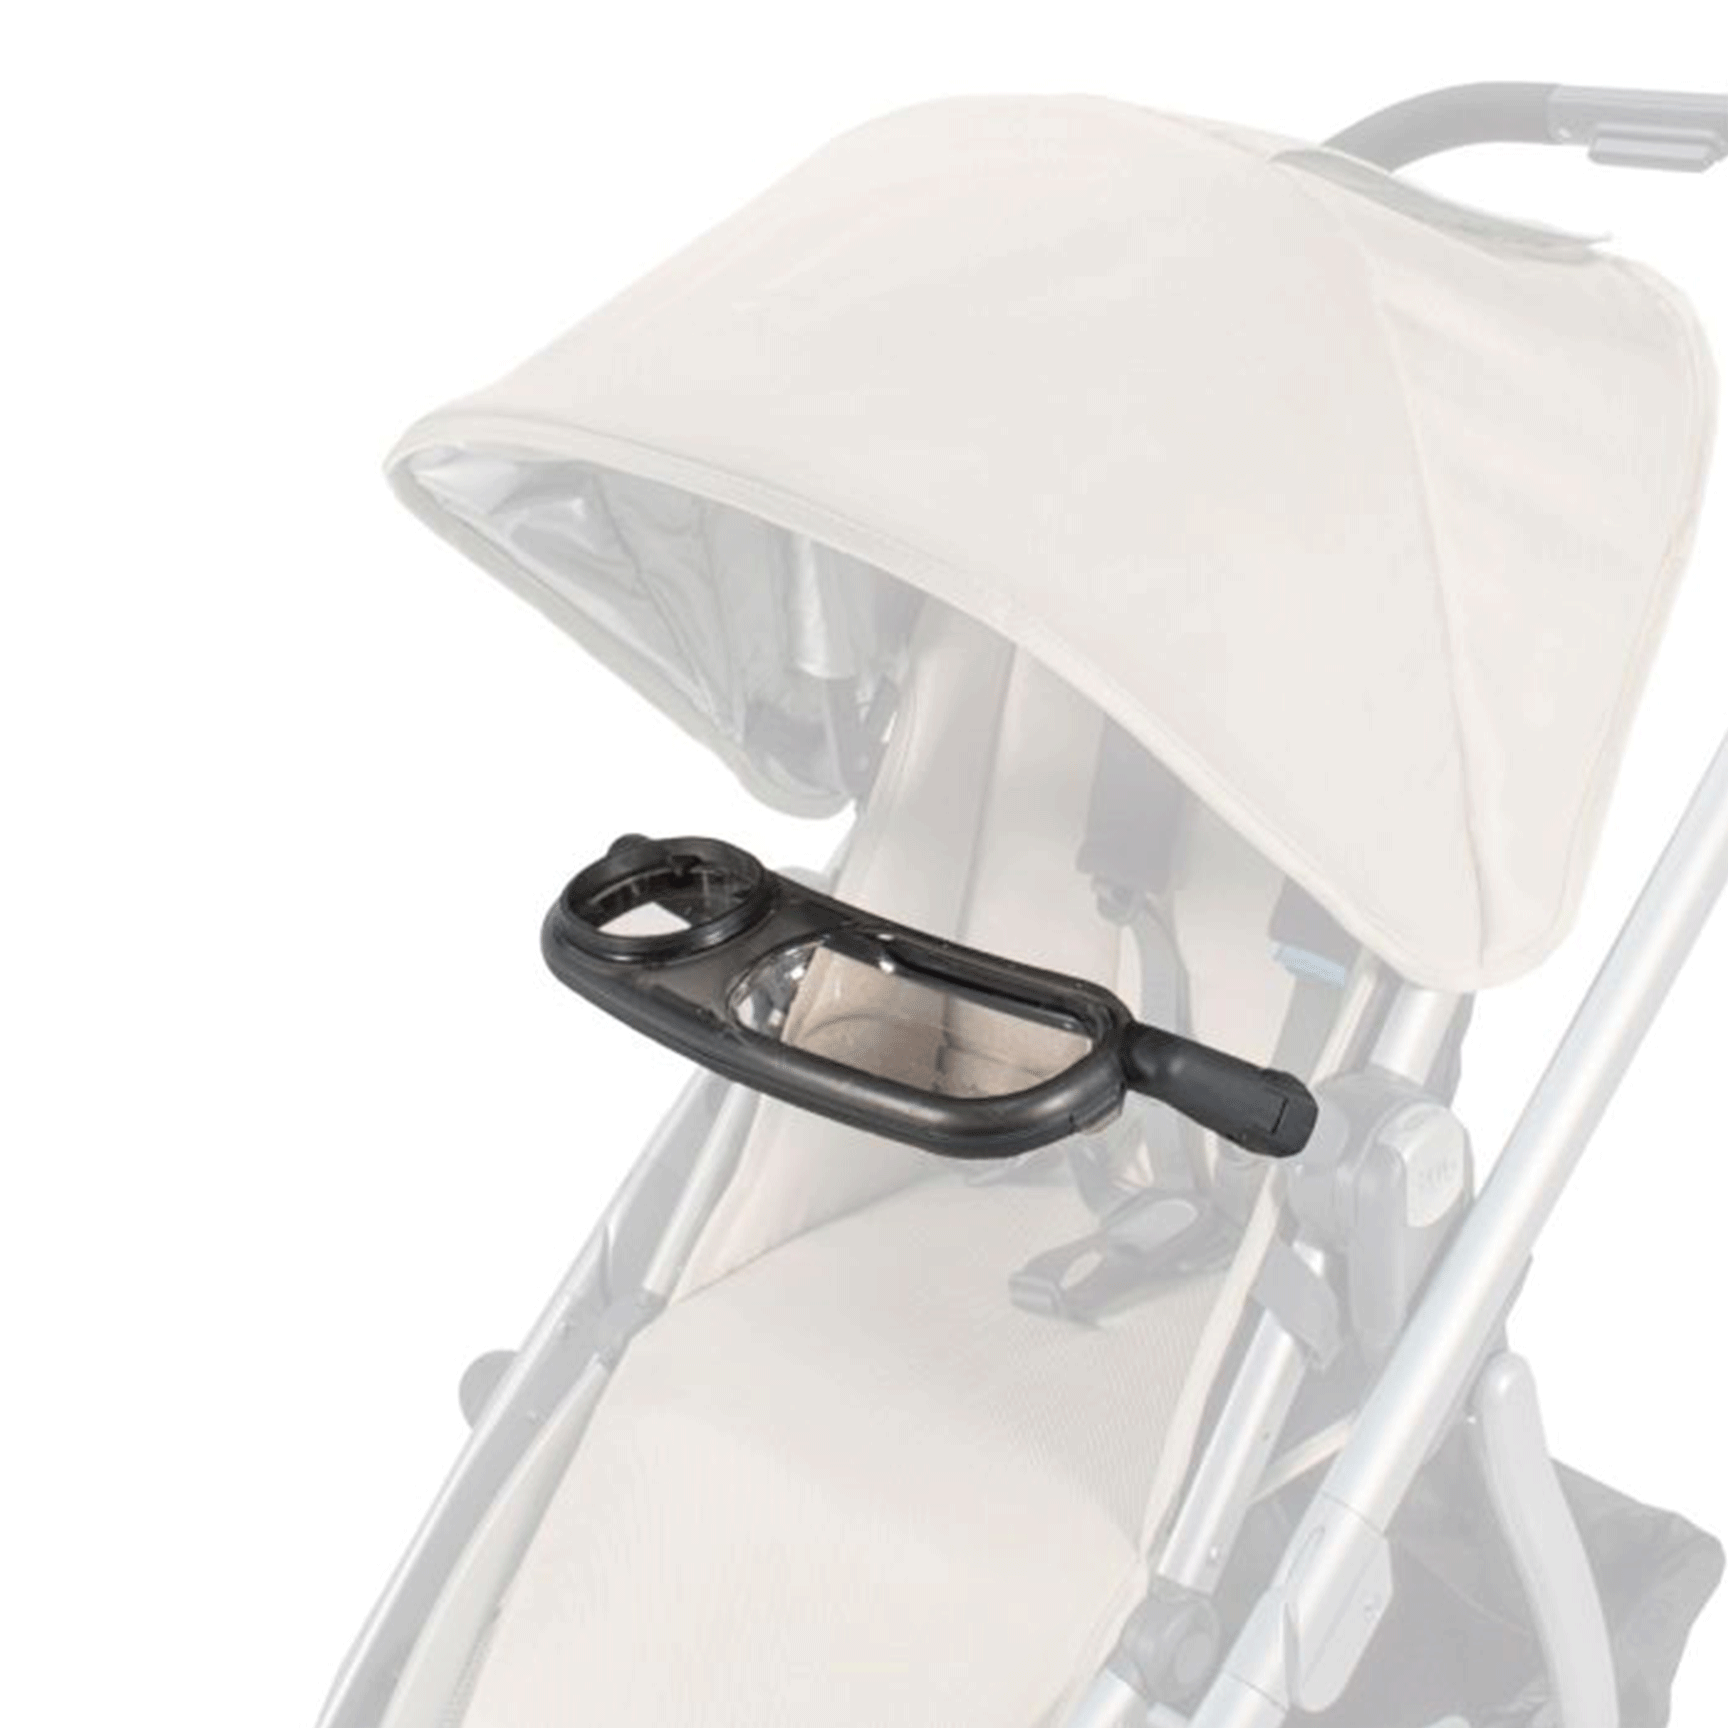 Uppababy buggy accessories UPPAbaby UPPAbaby Snack tray 0212